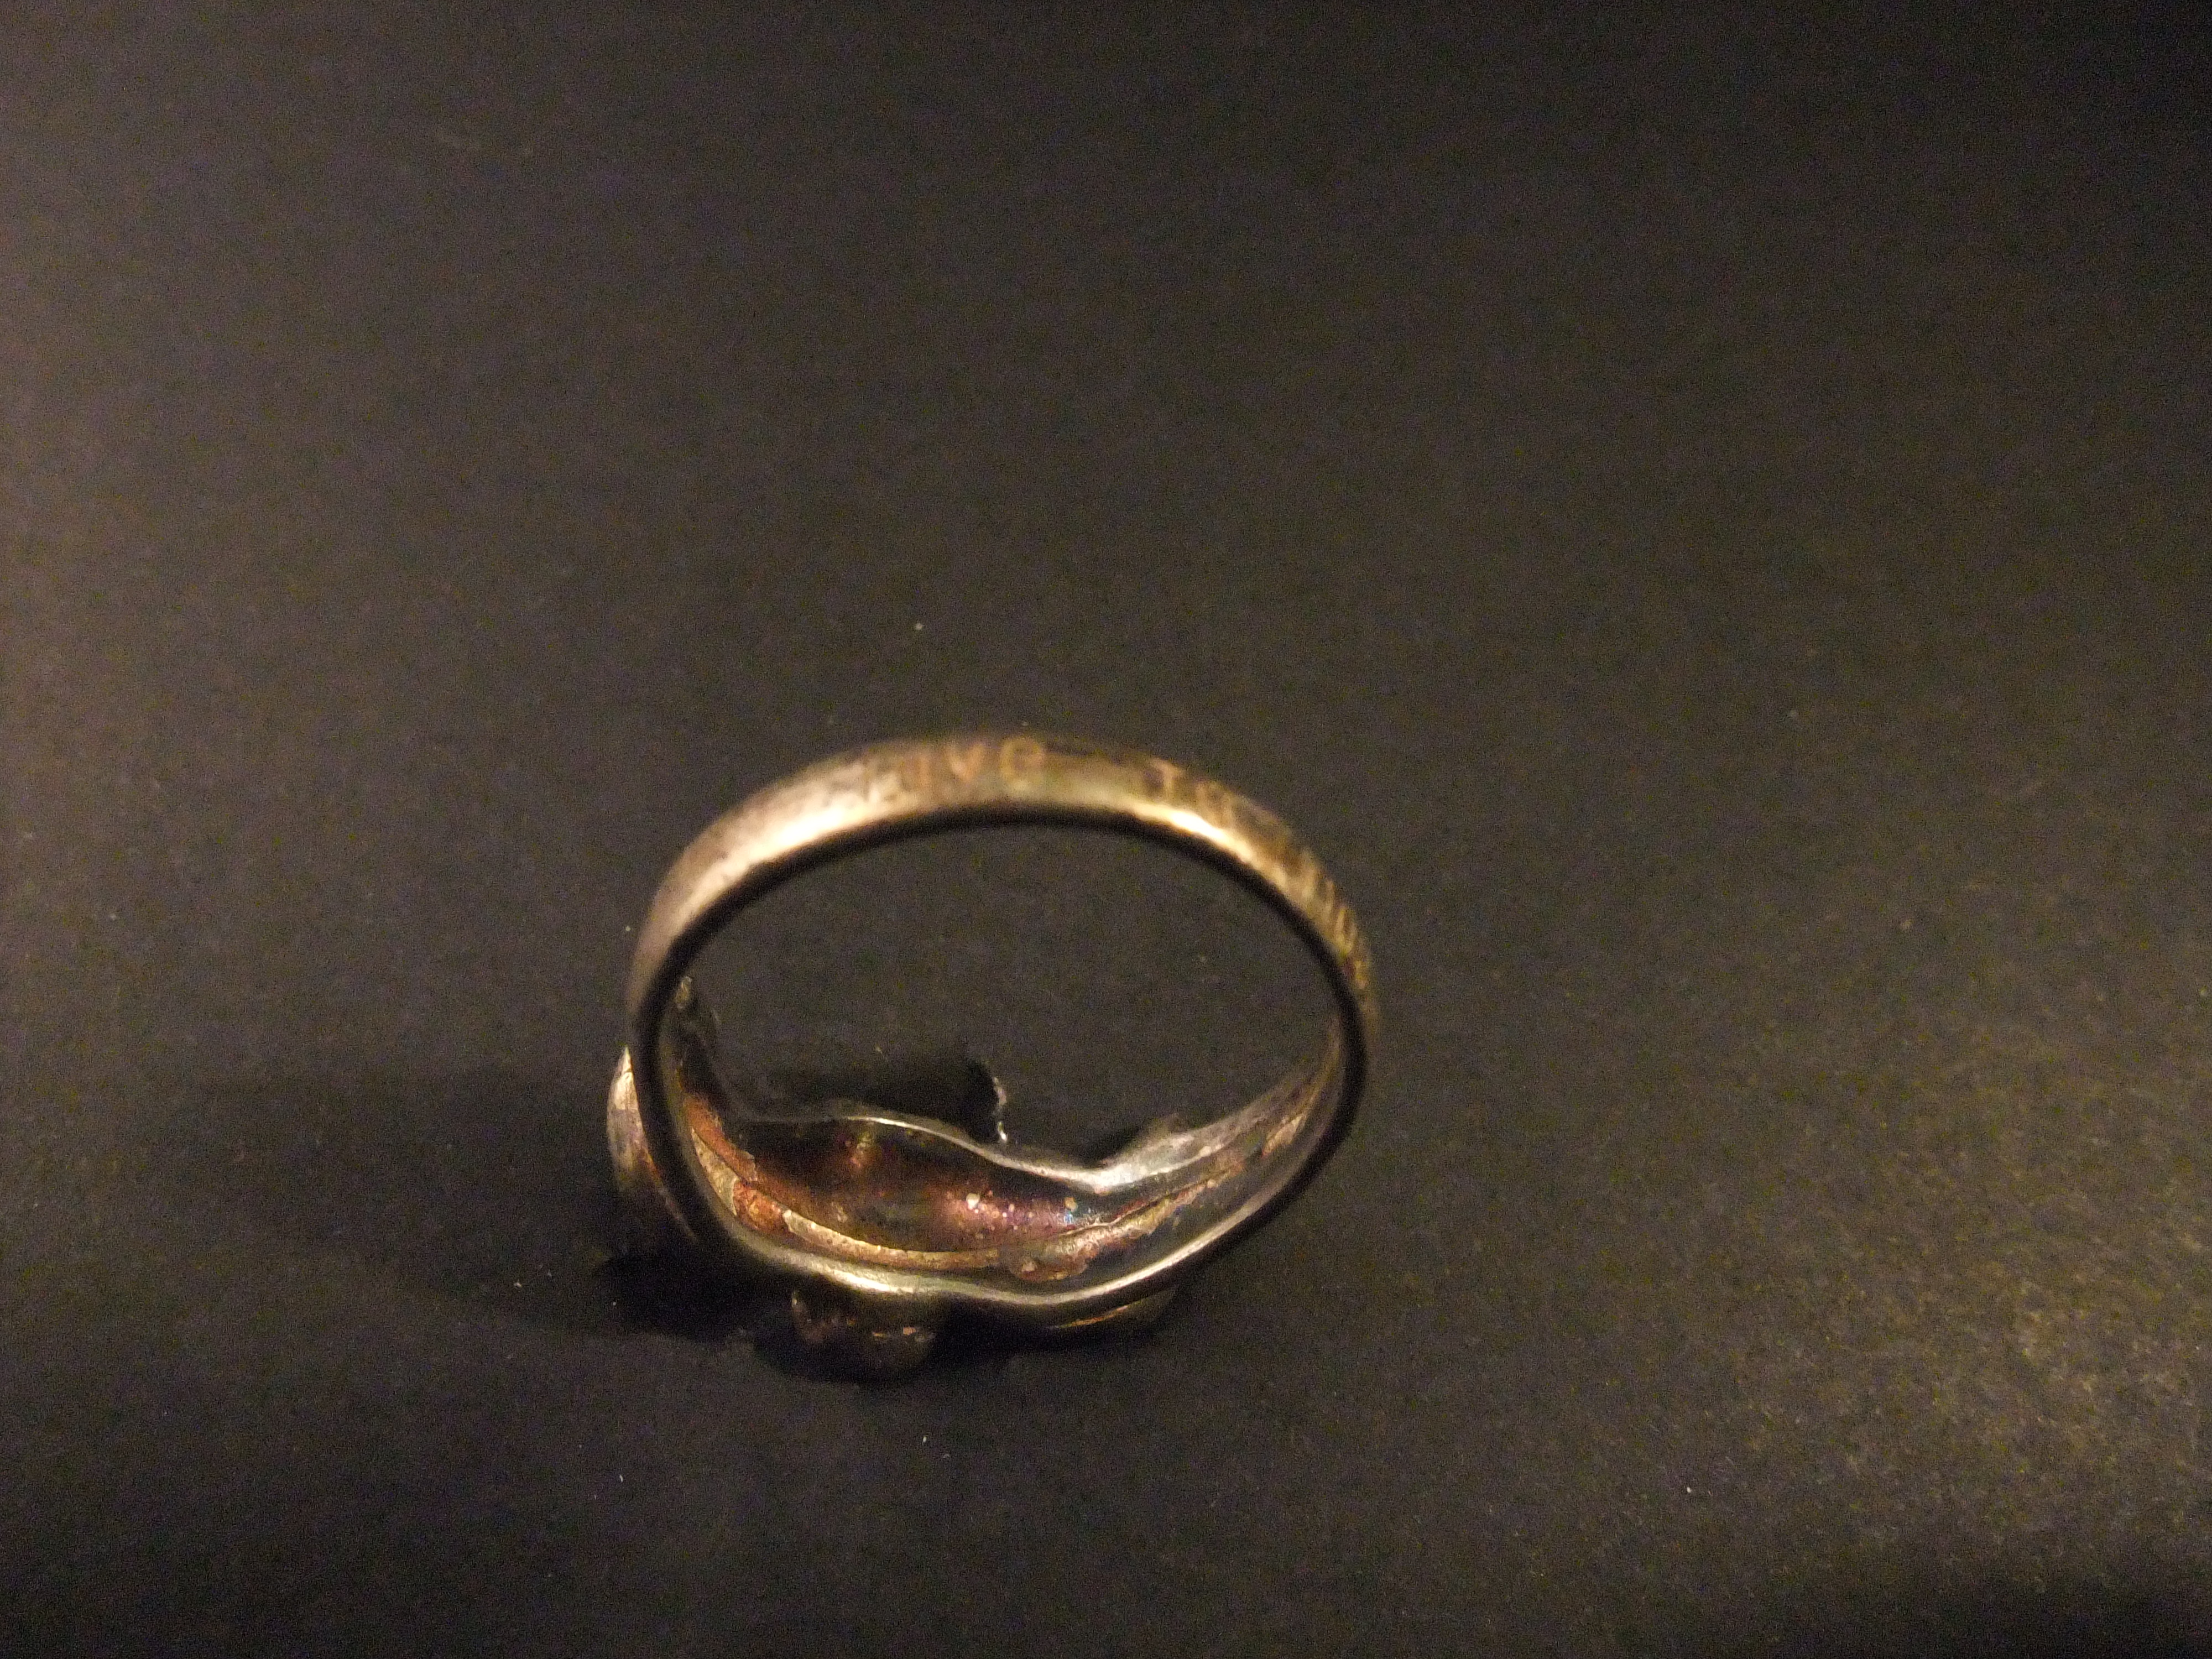 Live to Ride, Ride to Live.motto of the Harley-Davidson,zilver-zilverkleurige ring (4)